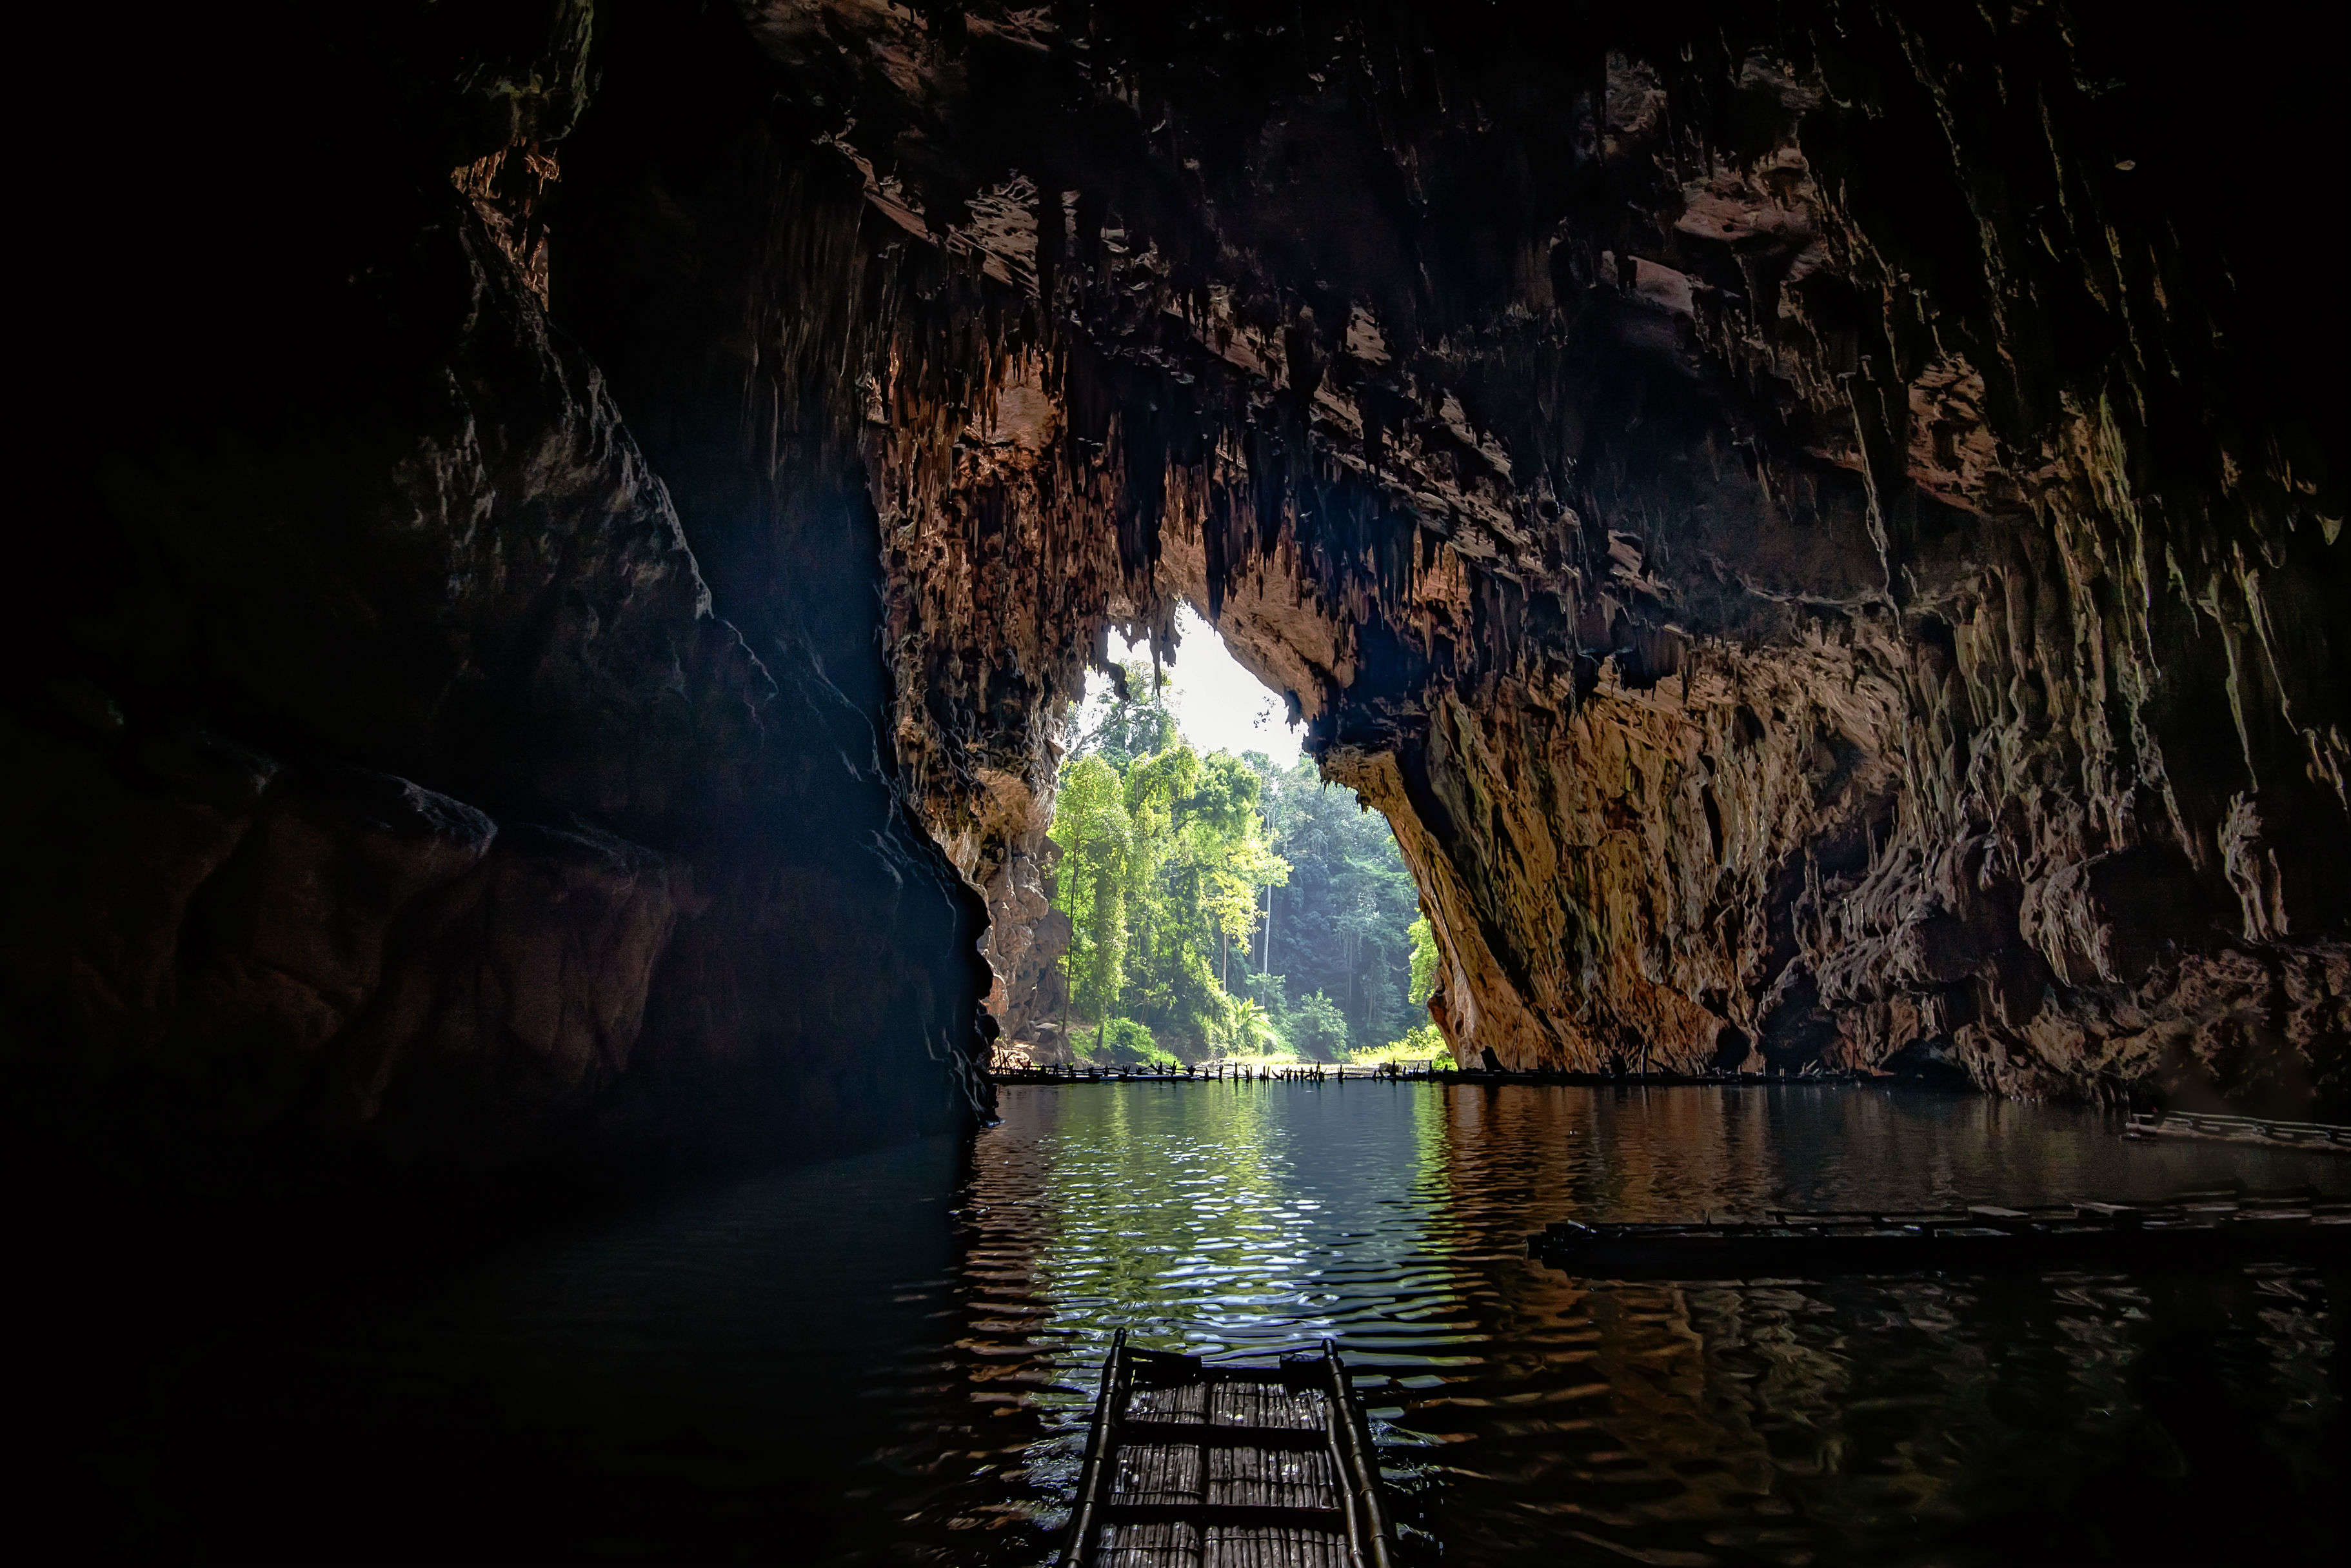 Thailand’s Tham Luang Cave is now open for visitors